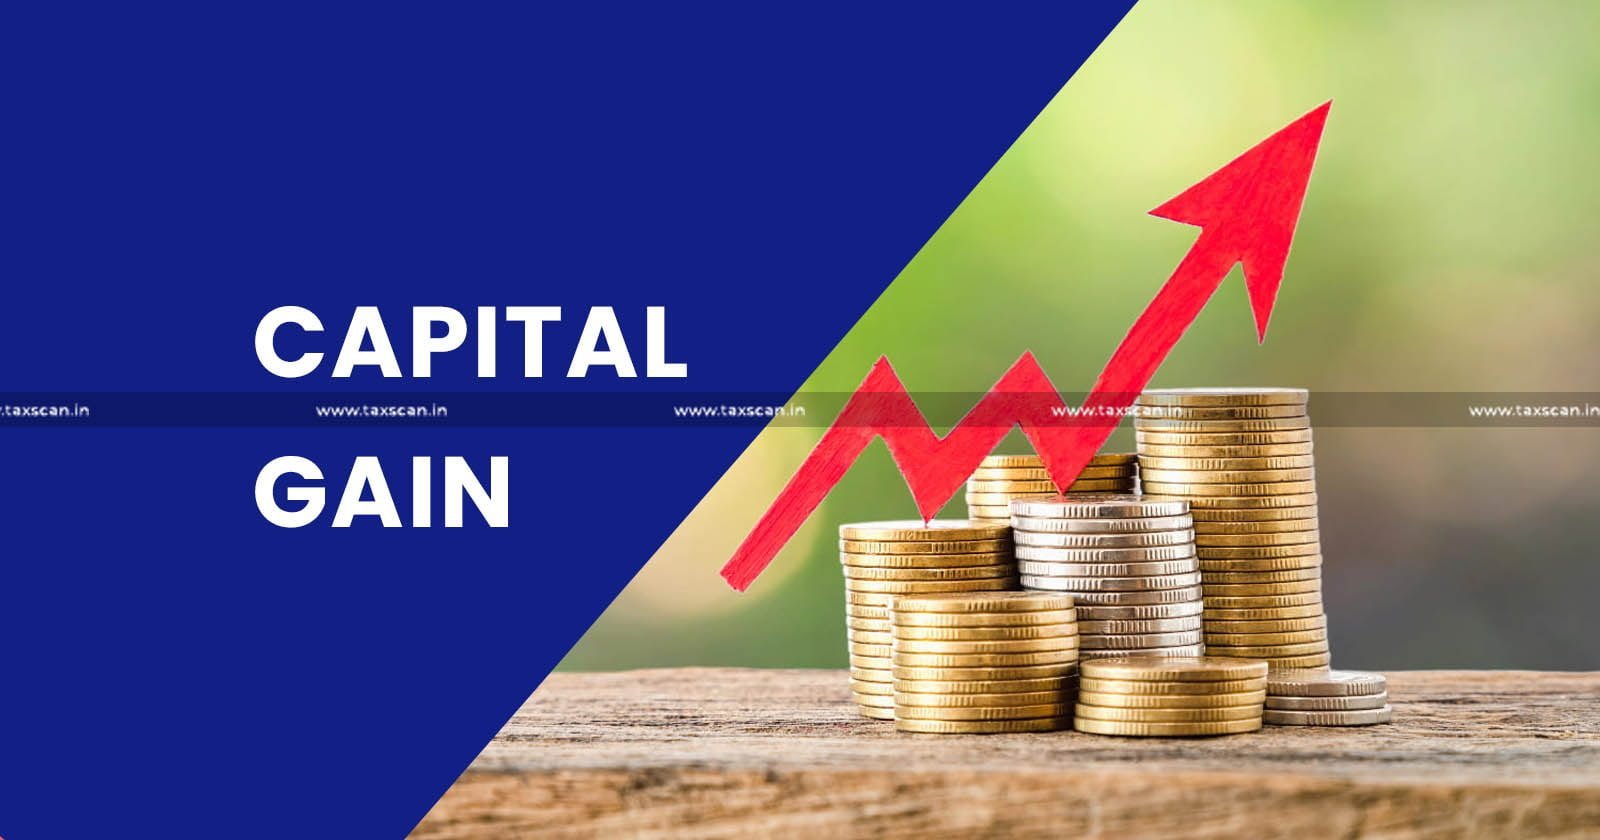 Capital gain - Capital gain deduction - deduction - residential house - purchase of residential house - ITAT - taxscan